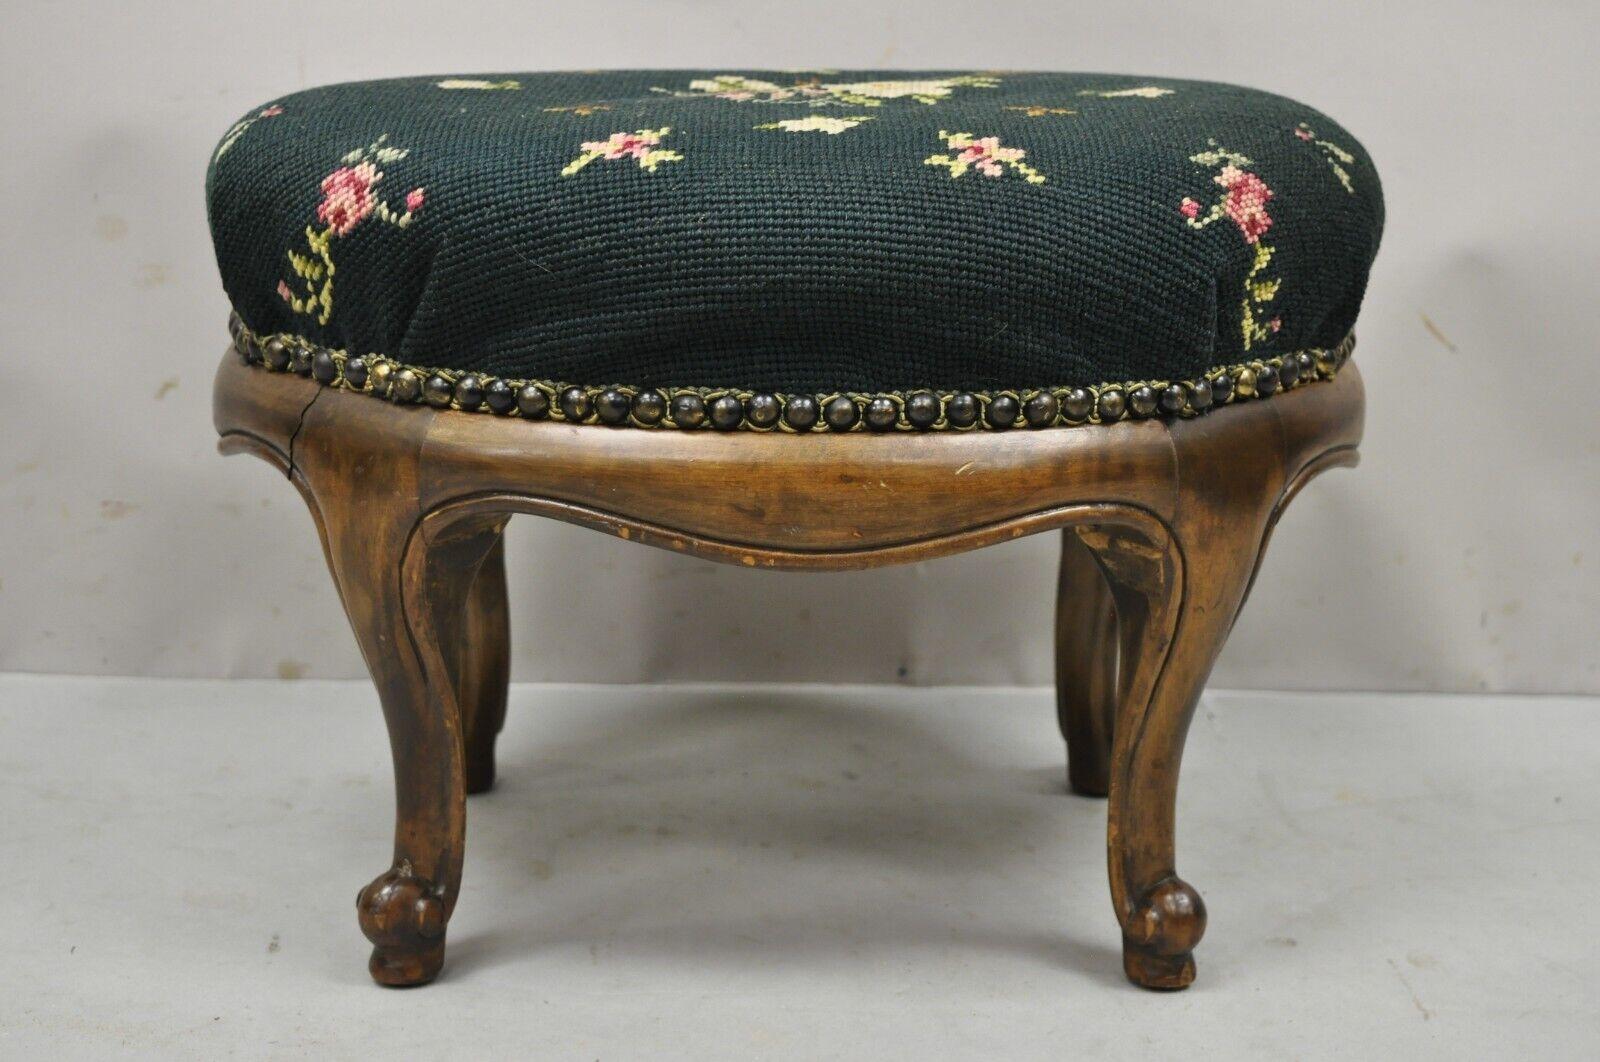 Antique French Victorian Green Floral Needlepoint Oval Mahogany Small Footstool 5